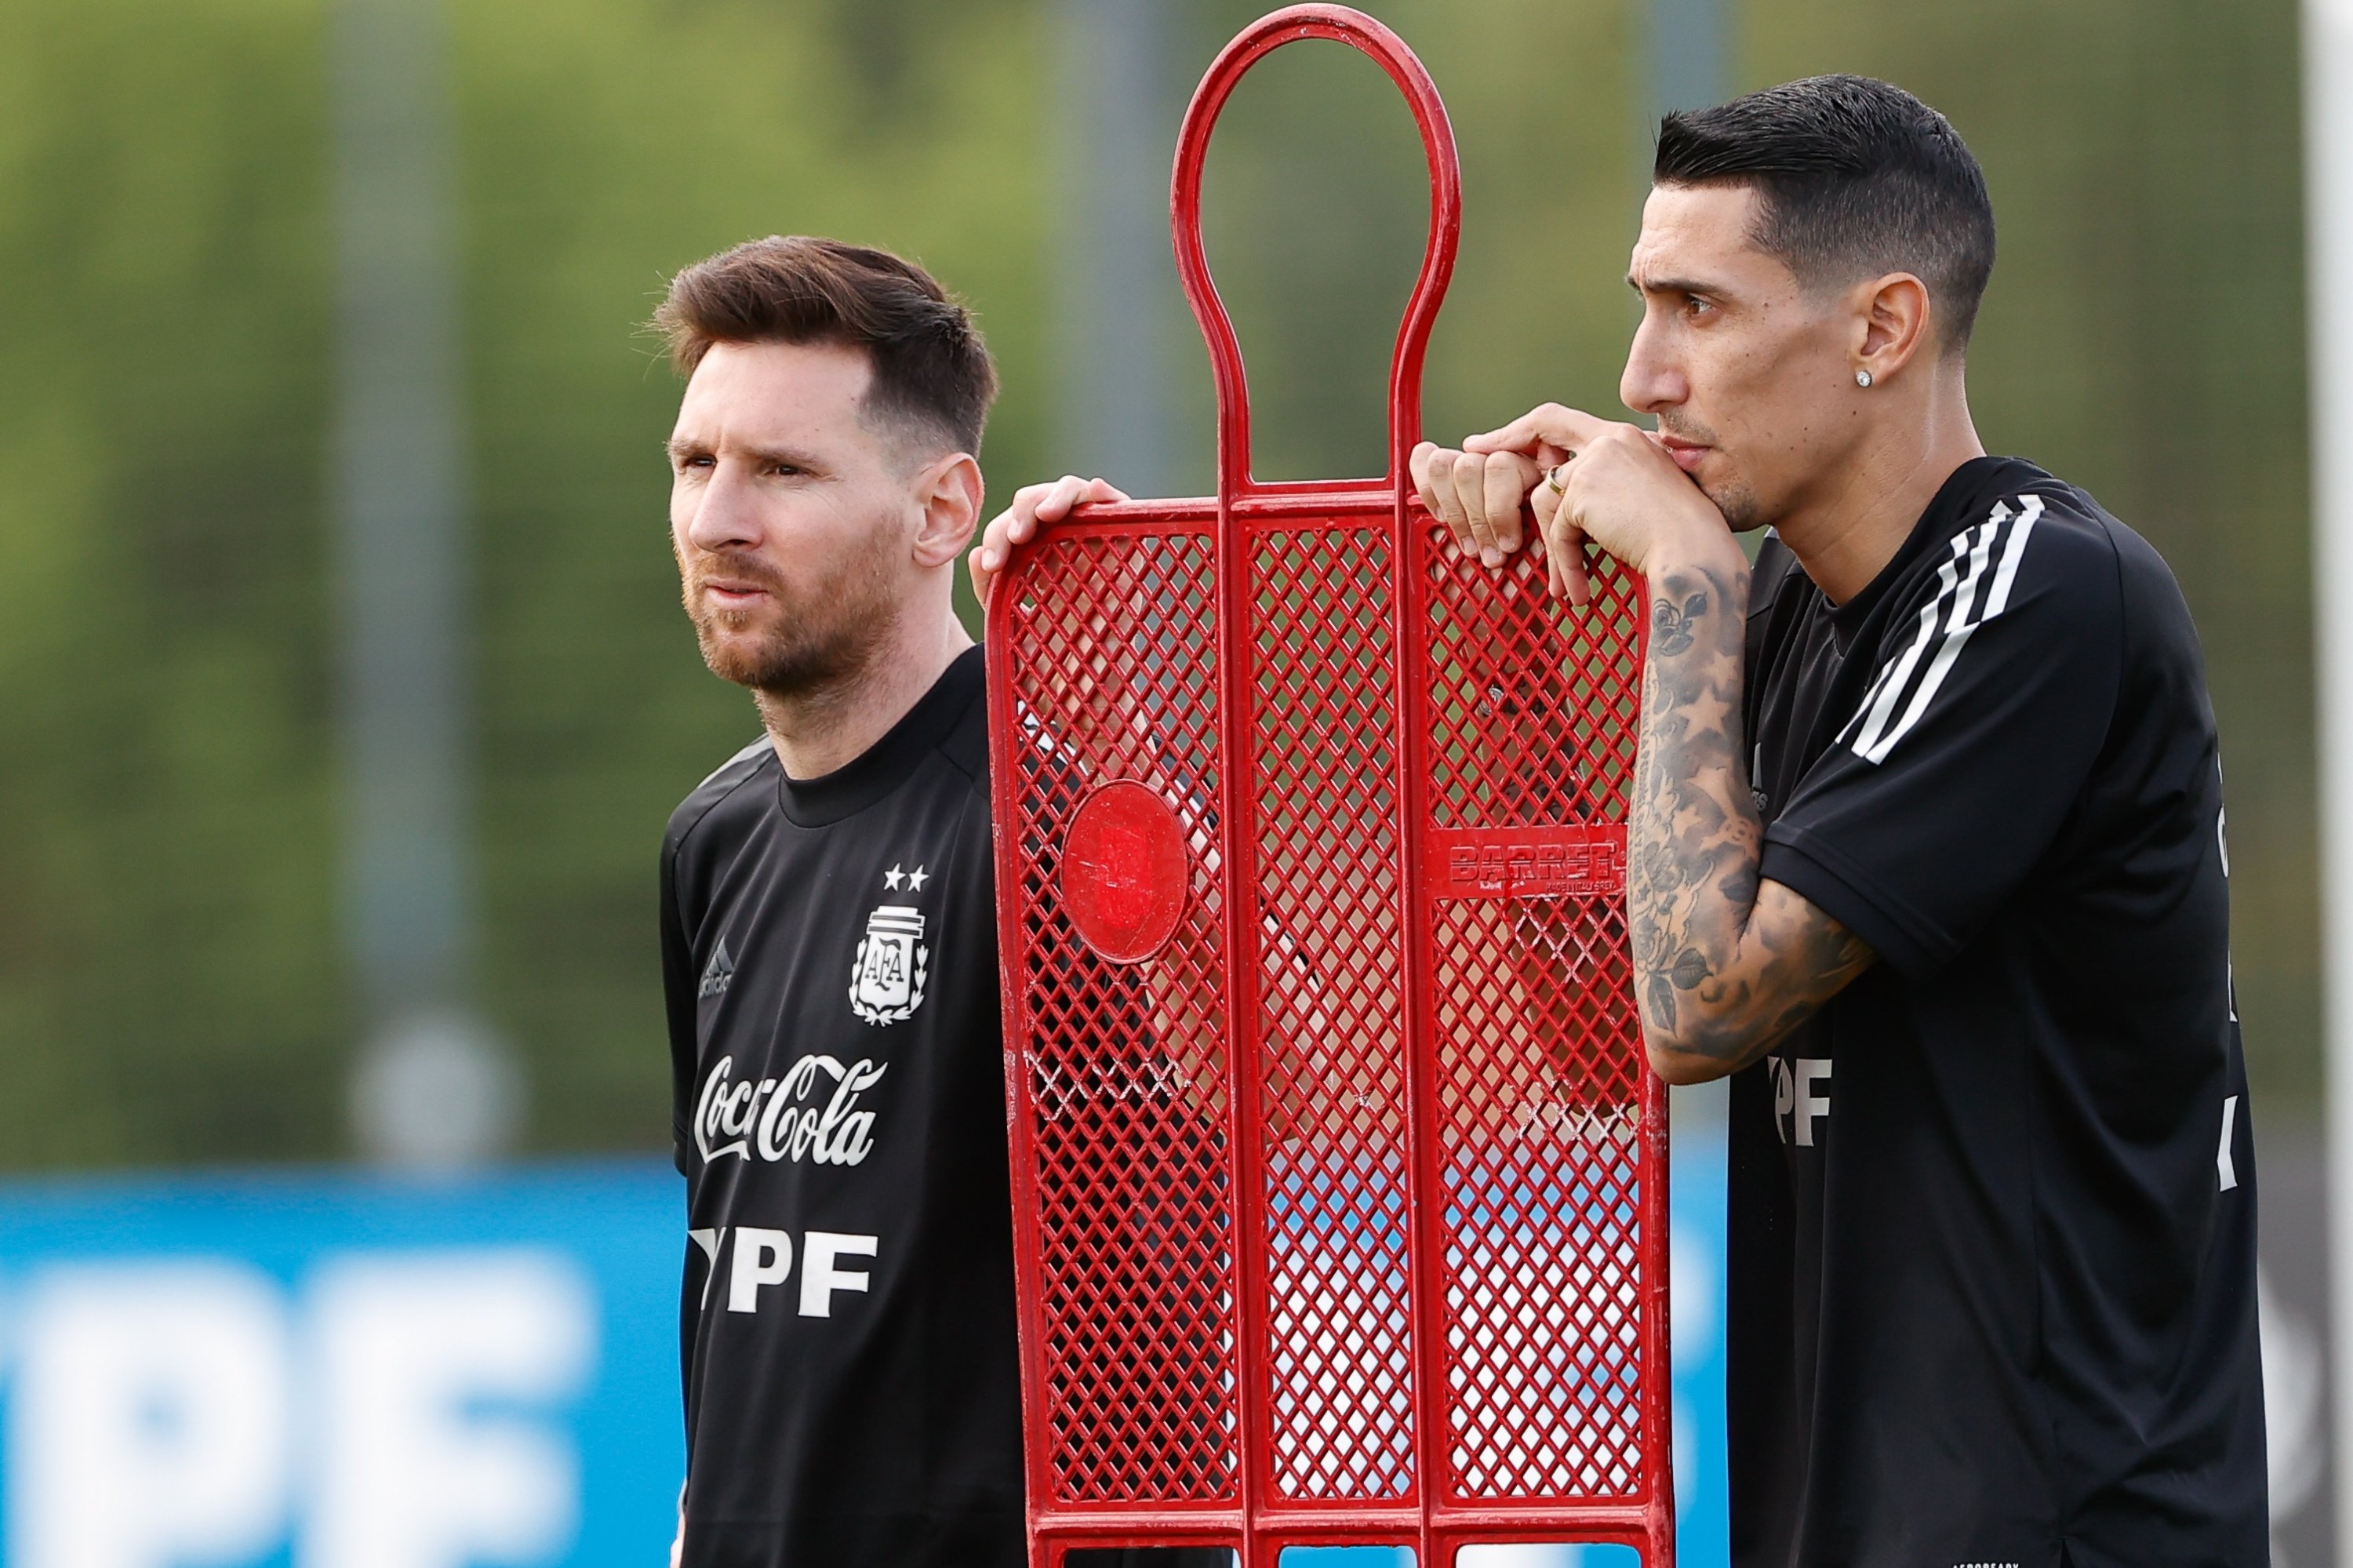 Lionel Messi (L) and Angel Di Maria attend a training session of the Argentina national football team in Buenos Aire, Argentina, Nov. 9, 2021. (EPA Photo)